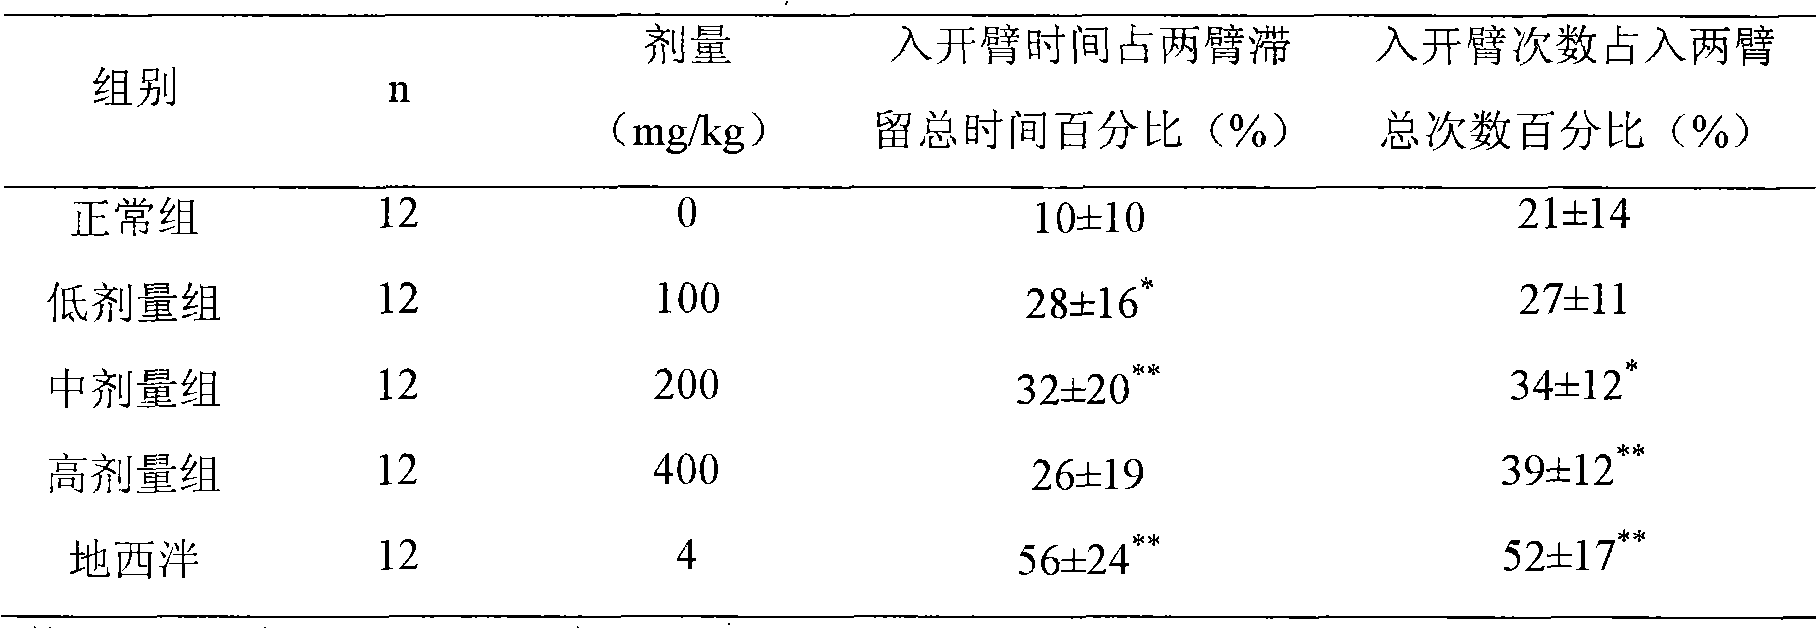 Anti-anxiety medicine by using rheum officinate root extract as active ingredient, and method and application thereof